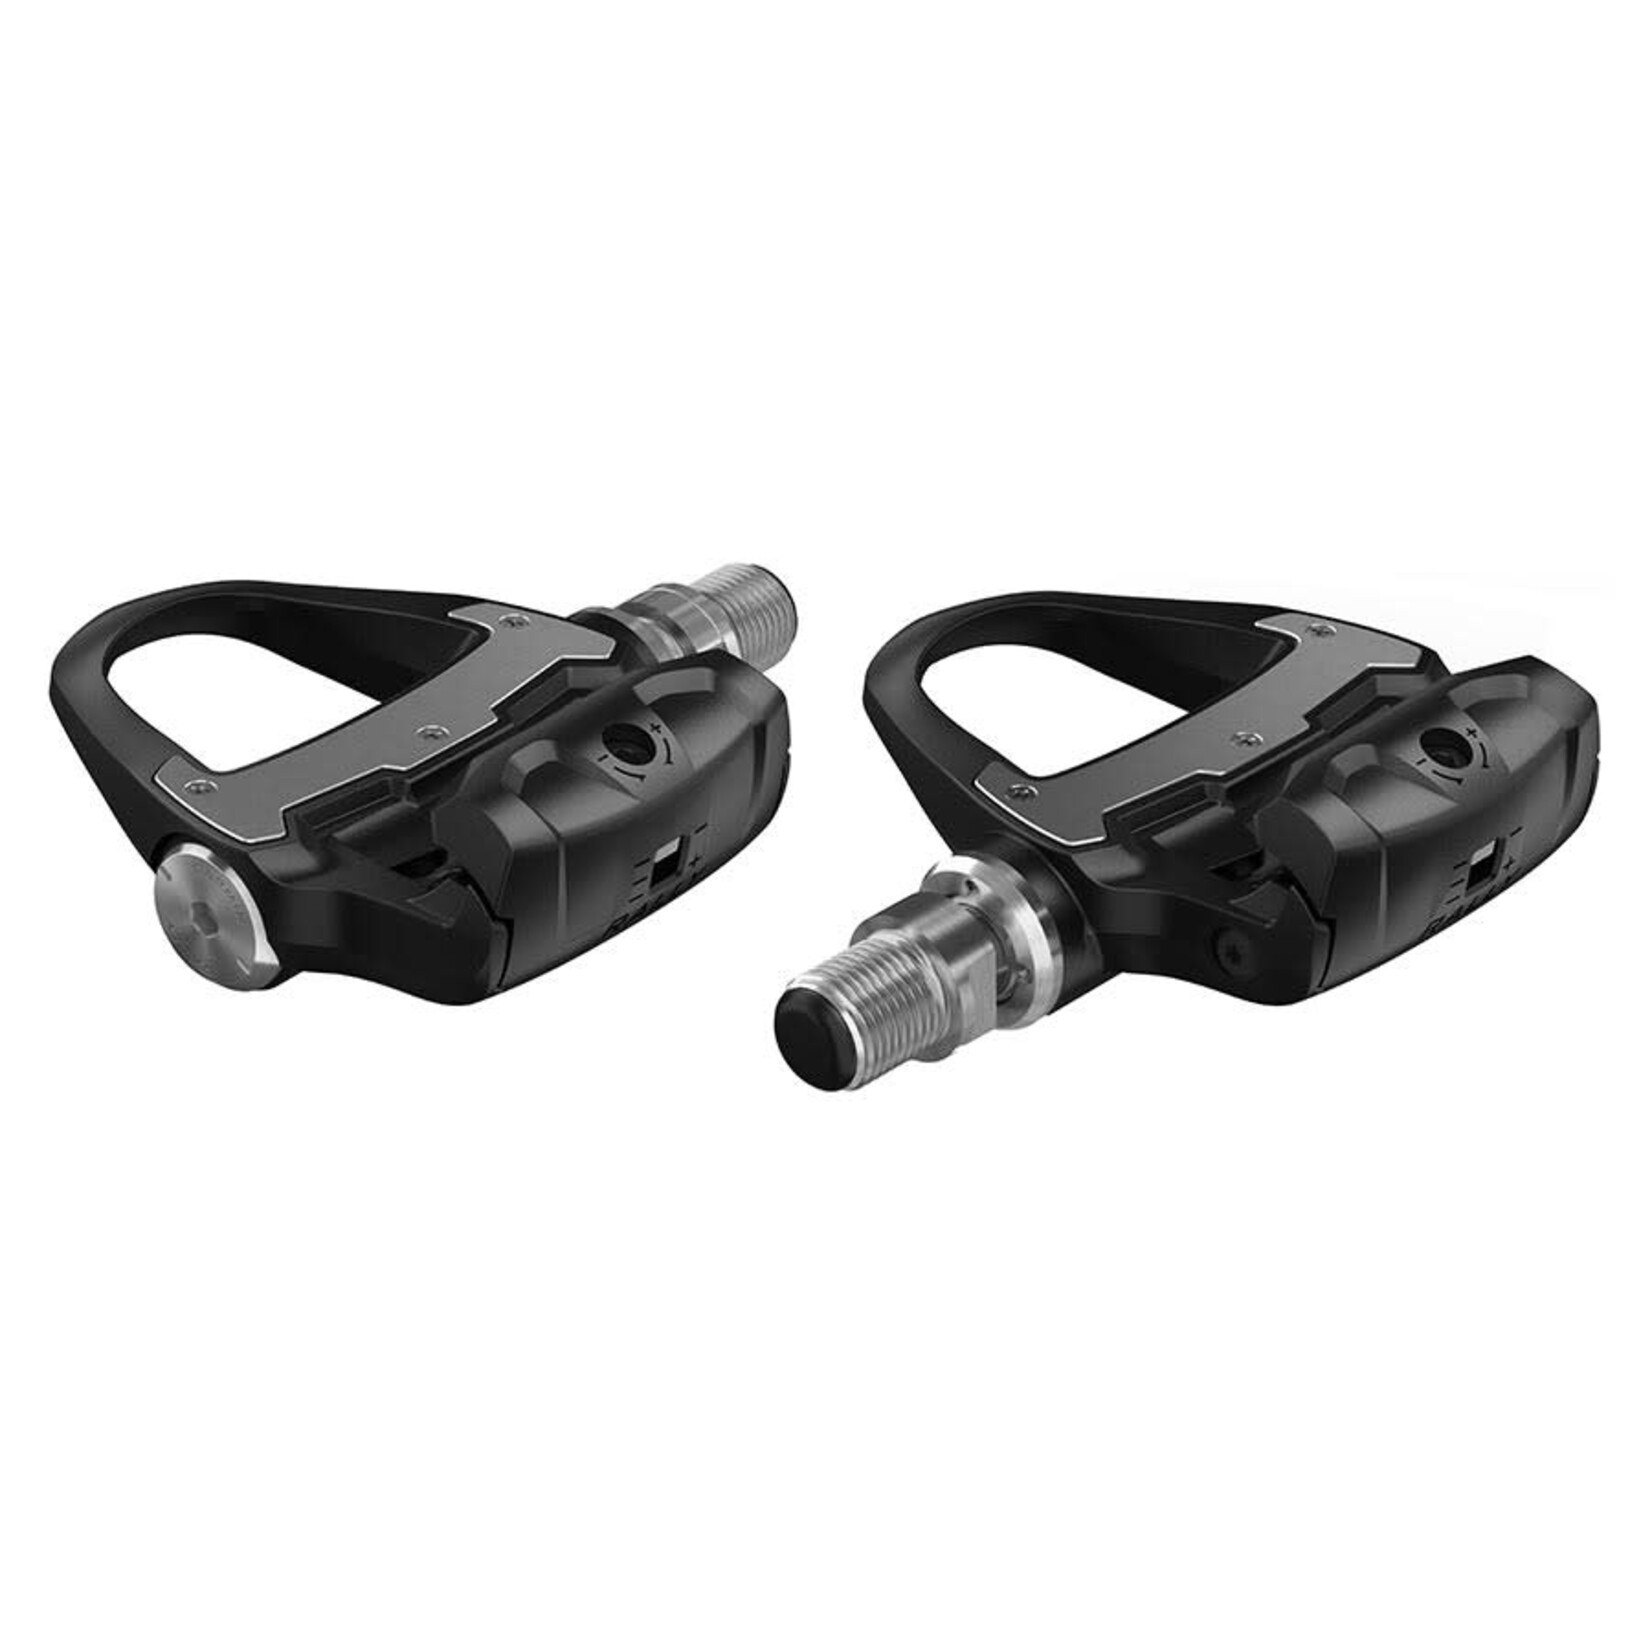 Garmin Rally RS200 Power Meter Pedals - Dual Sided Clipless, Composite, 9/16", Black, Pair, Dual-Sensing, Shimano SPD-SL